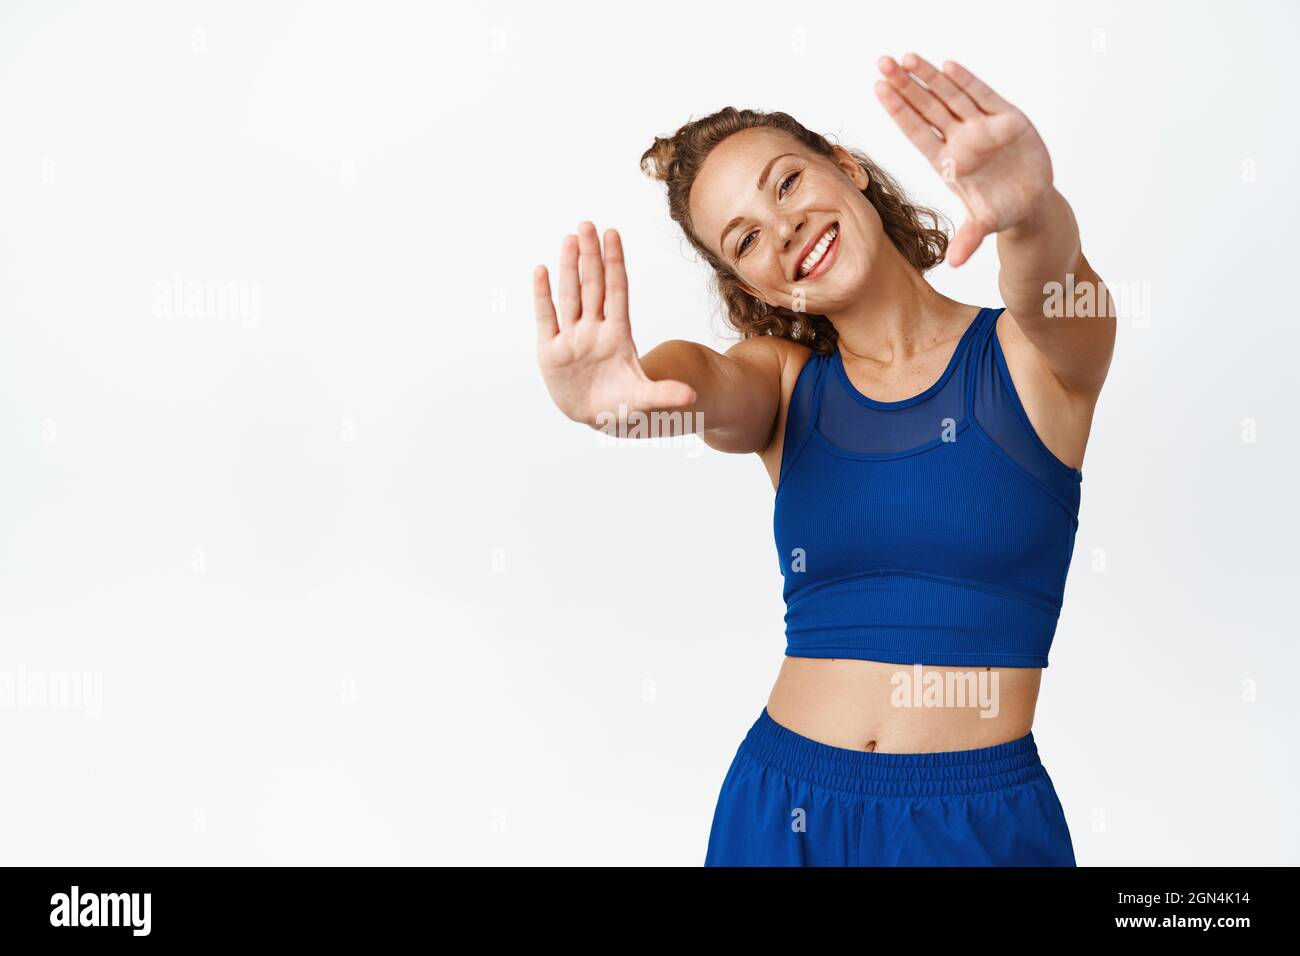 Happy sporty girl in fitness clothing, stretching out hands and smiling, picturing moment, saving memory, standing against white background Stock Photo